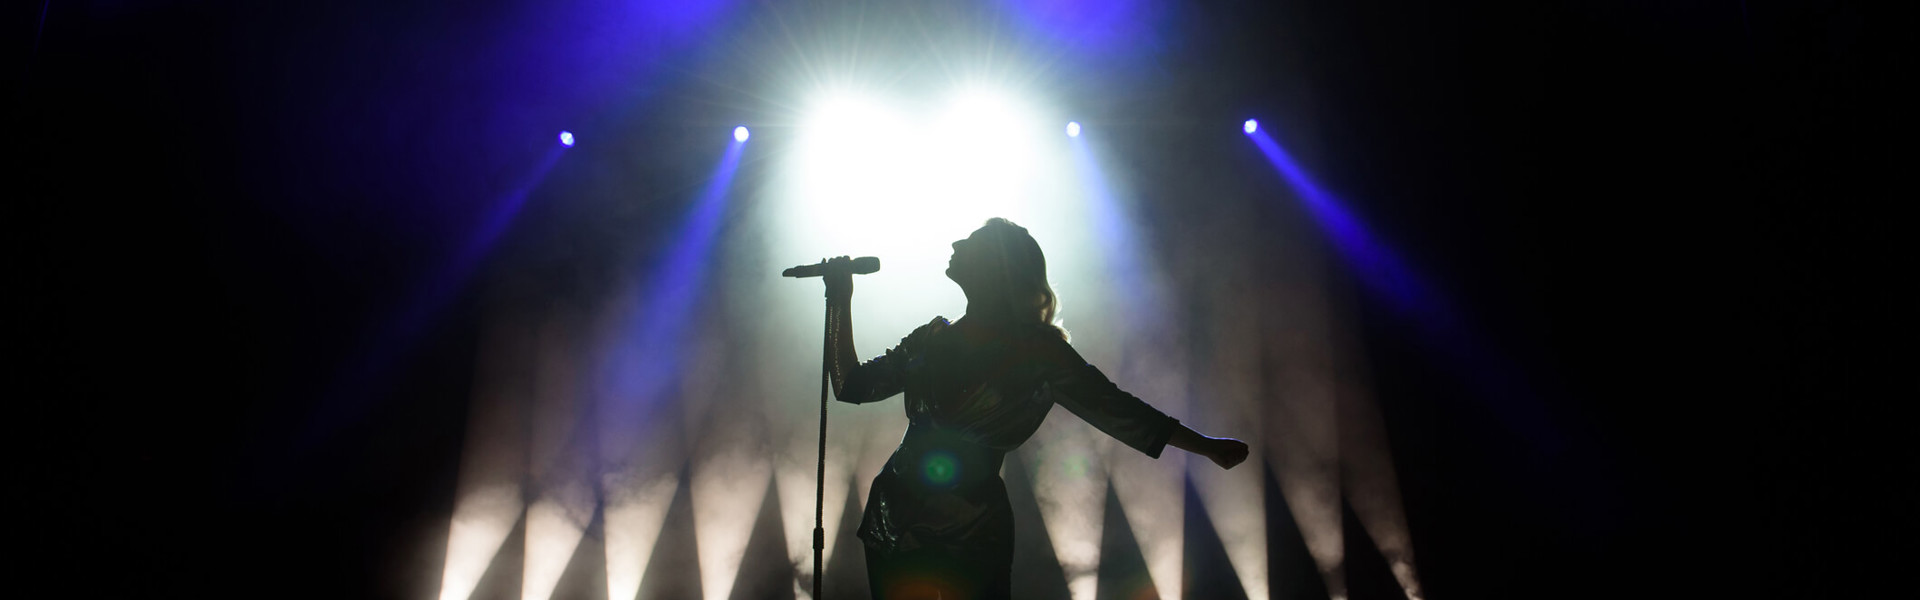 a silhouette of a performer singing into a microphone on stage